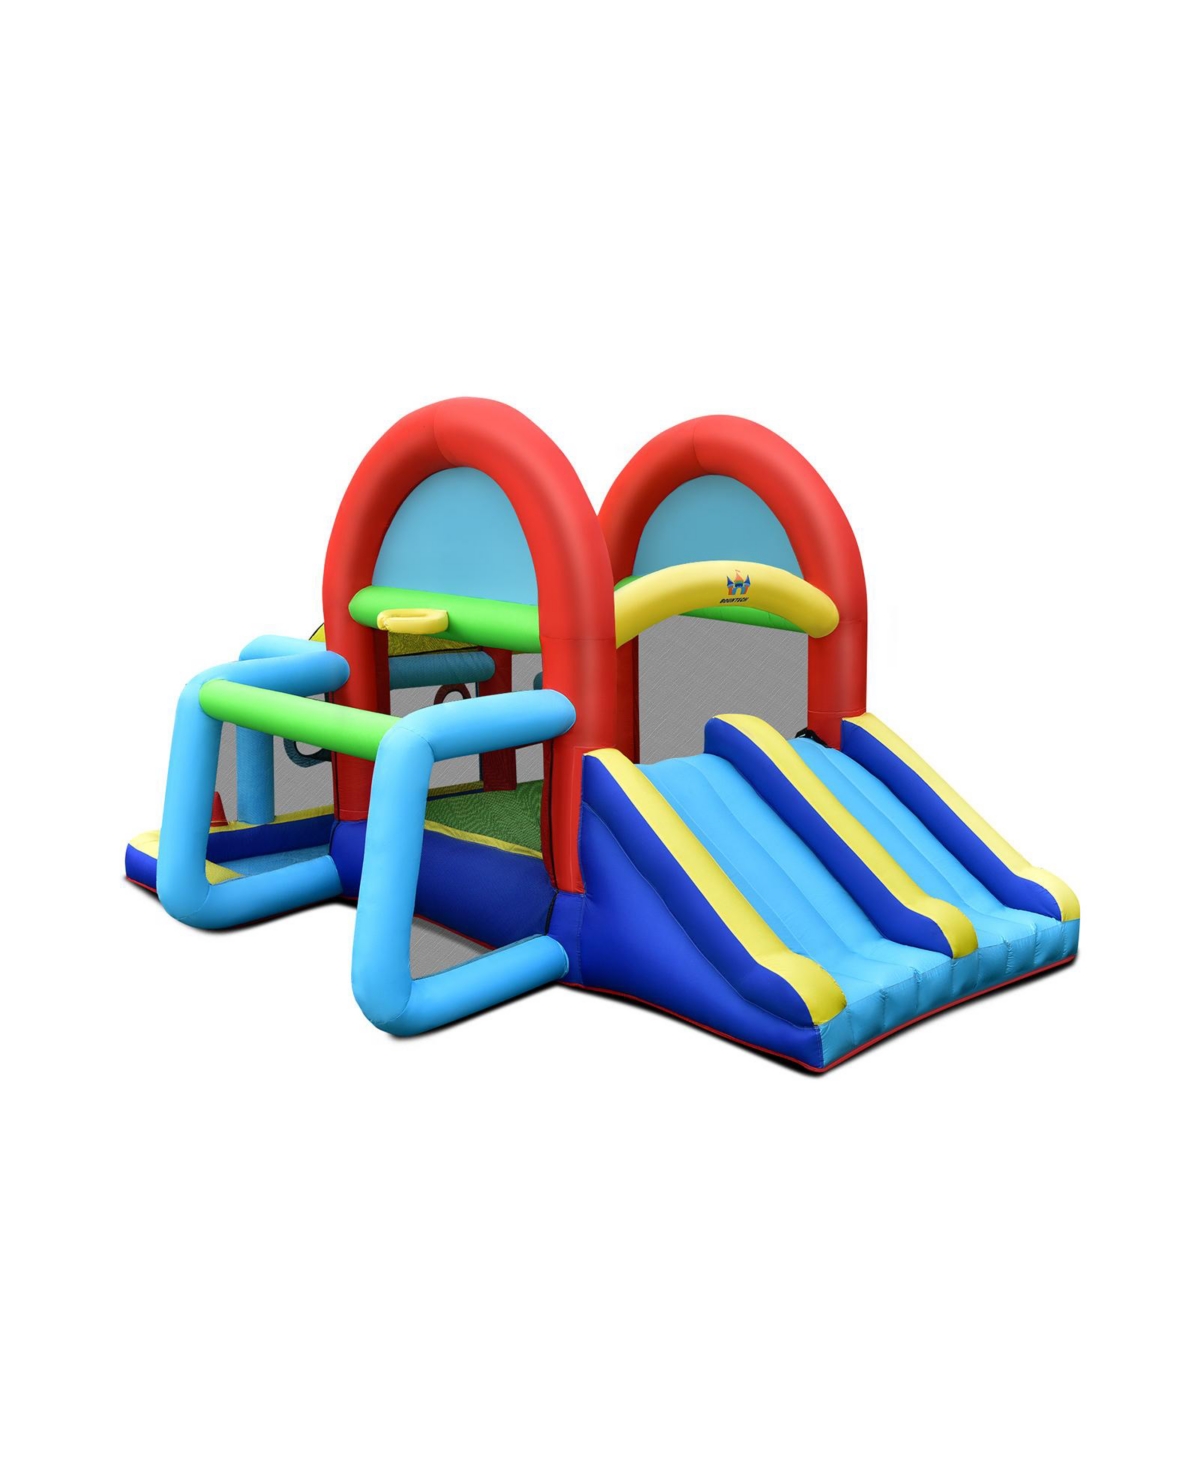 Inflatable Jumping Castle Bounce House with Dual Slides without Blower - Blue, Green, Red, Yellow